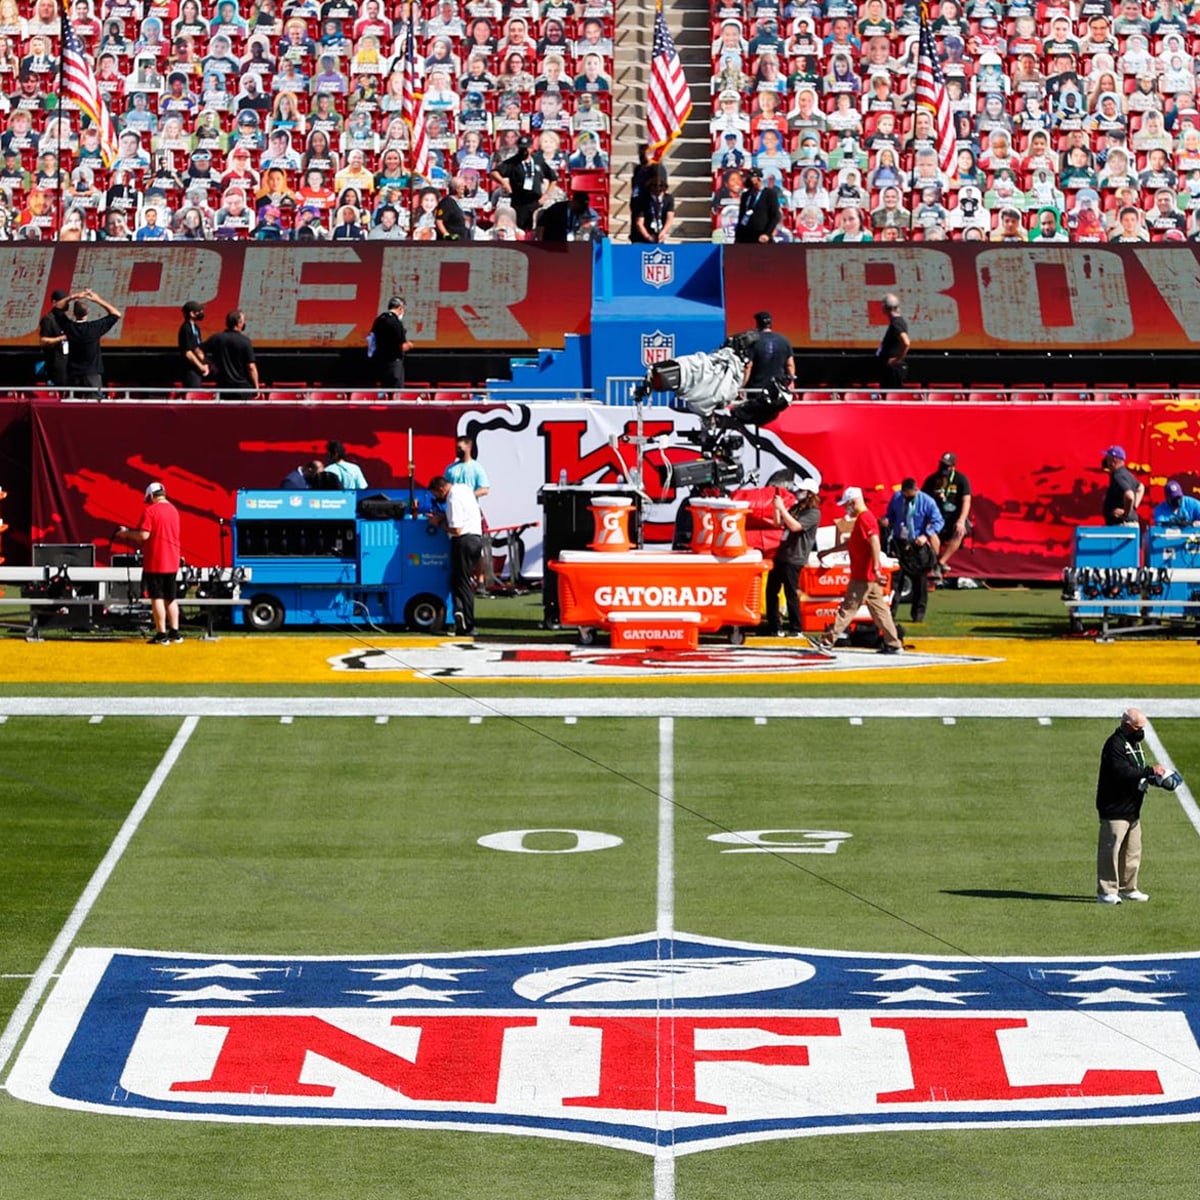 Monday Night Football schedule: Which teams are on MNF in Week 1